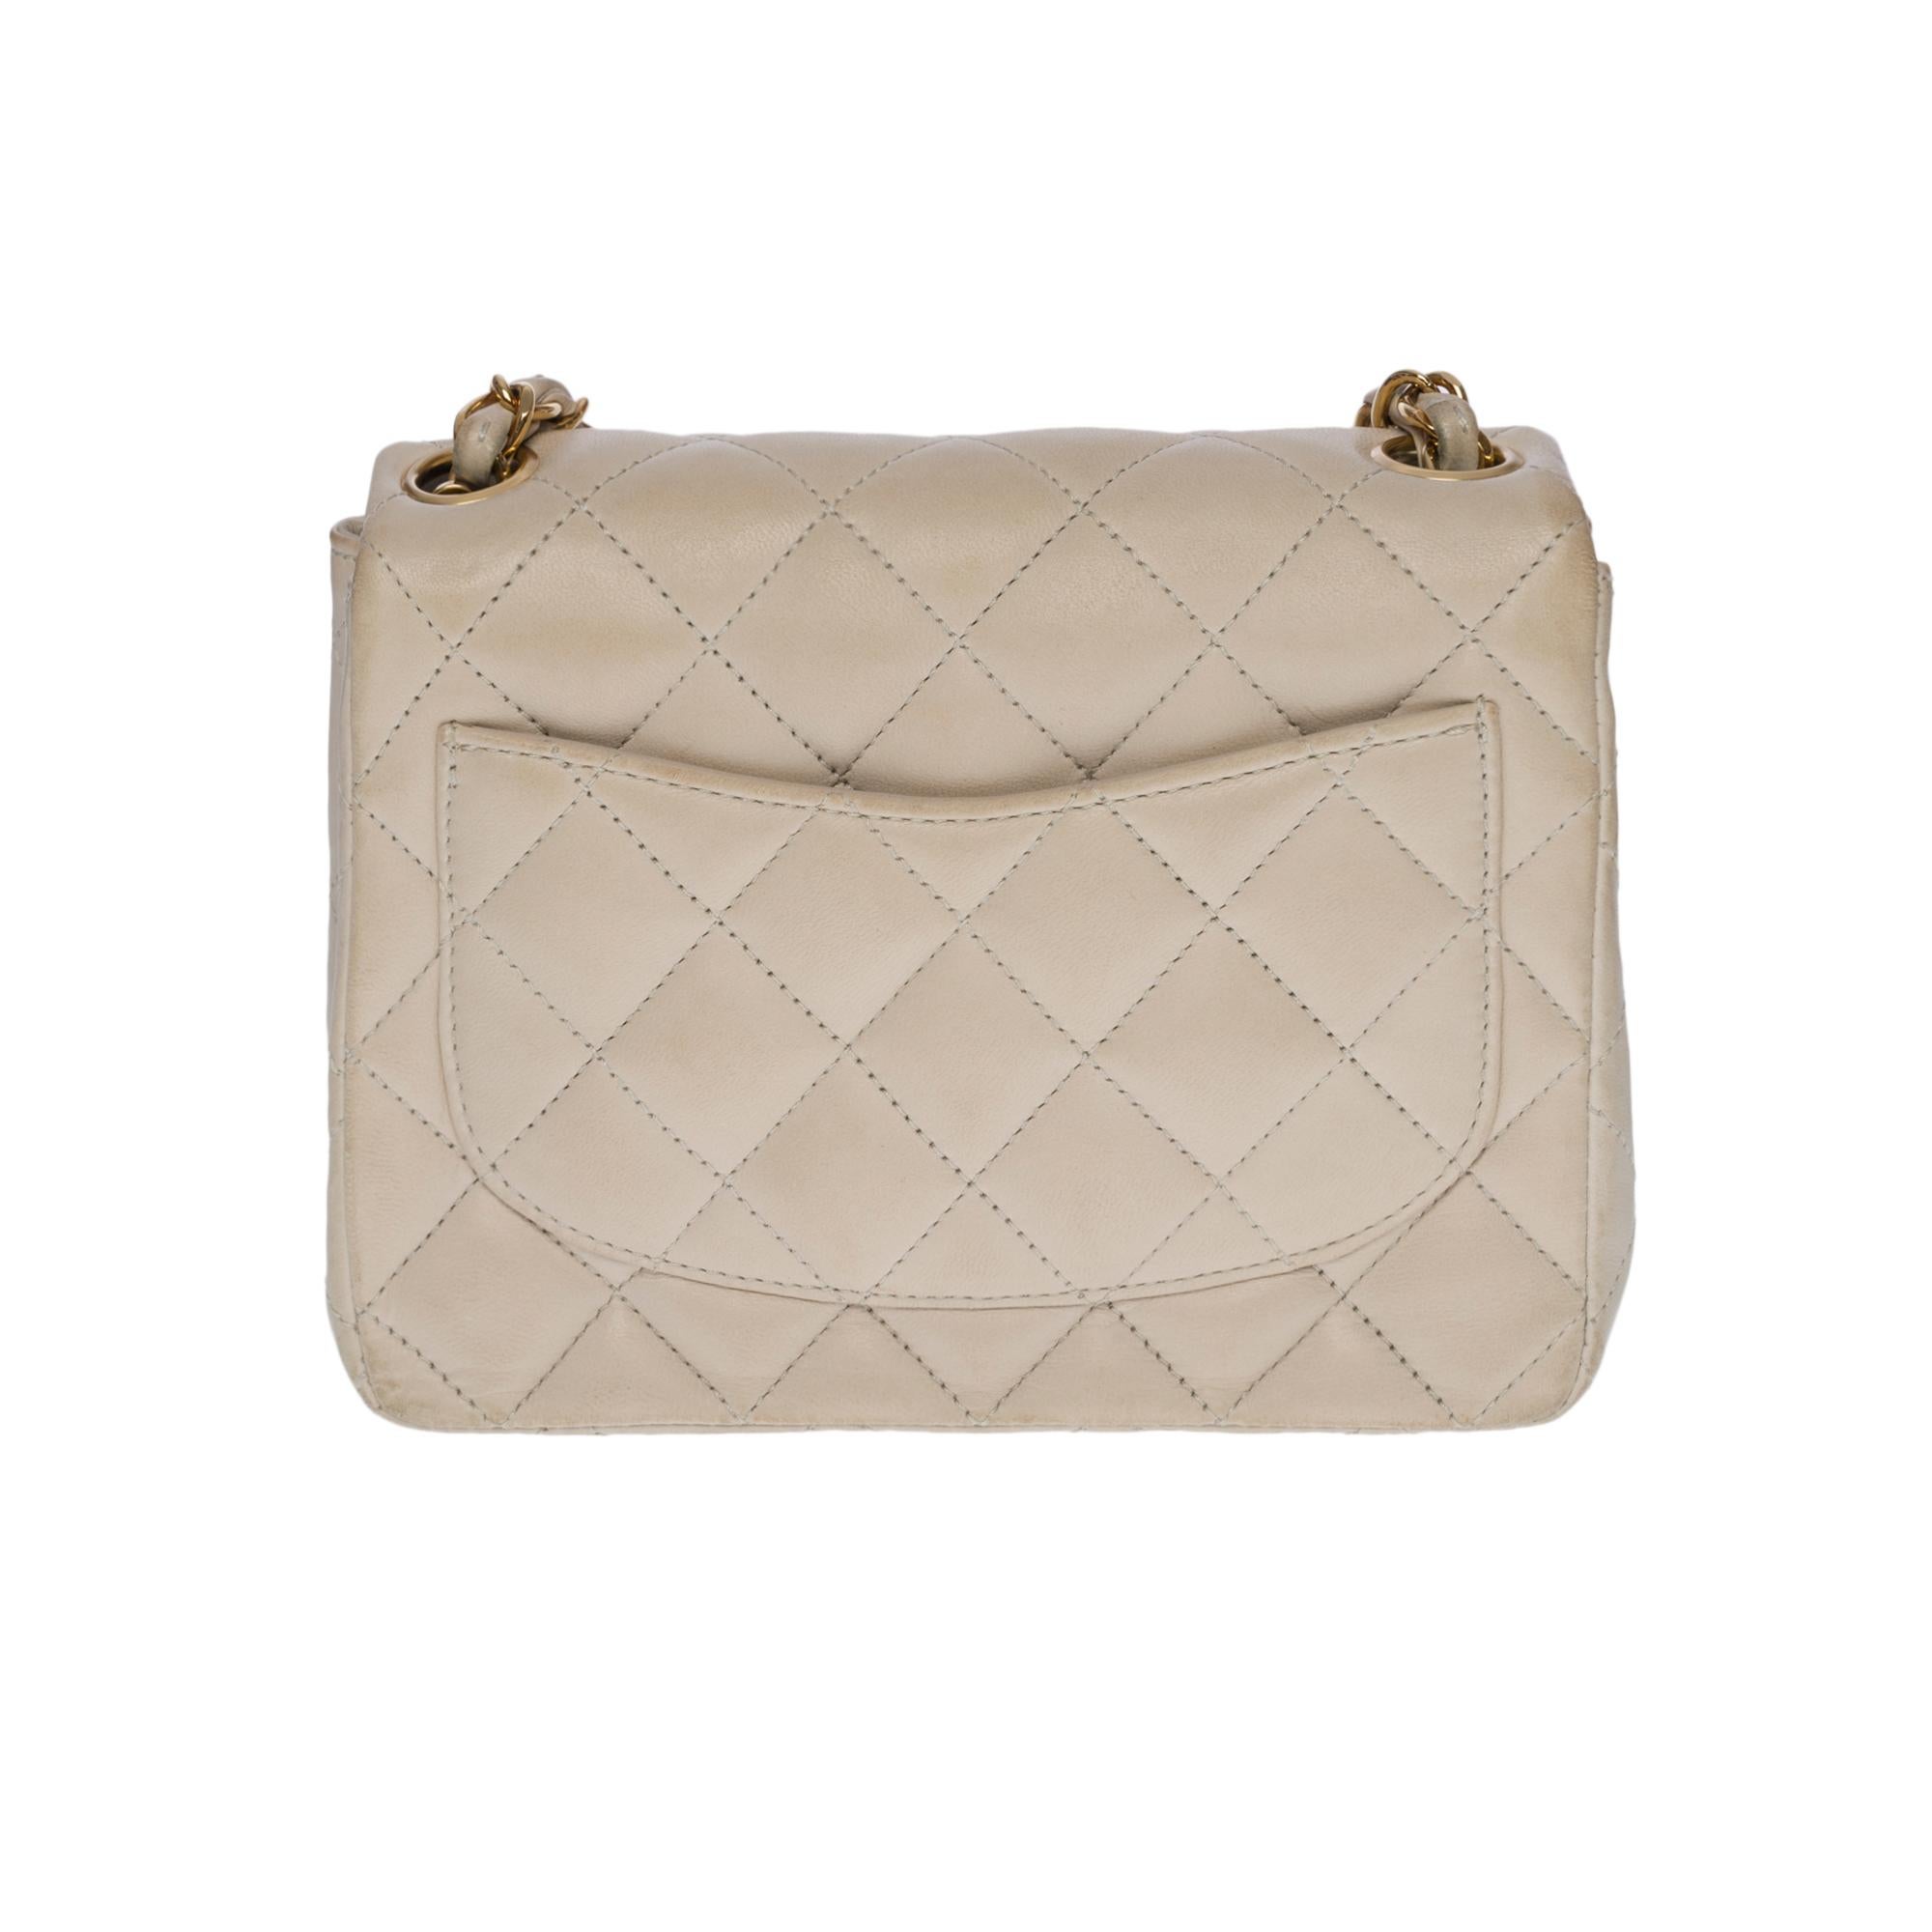 Gorgeous Chanel Mini Timeless Flap shoulder bag in ecru quilted lambskin leather, gold-plated metal hardware, gold-plated metal chain handle interlaced with ecru leather for a shoulder and shoulder carry
 
Backpack pocket 
Flap closure, gold-tone CC